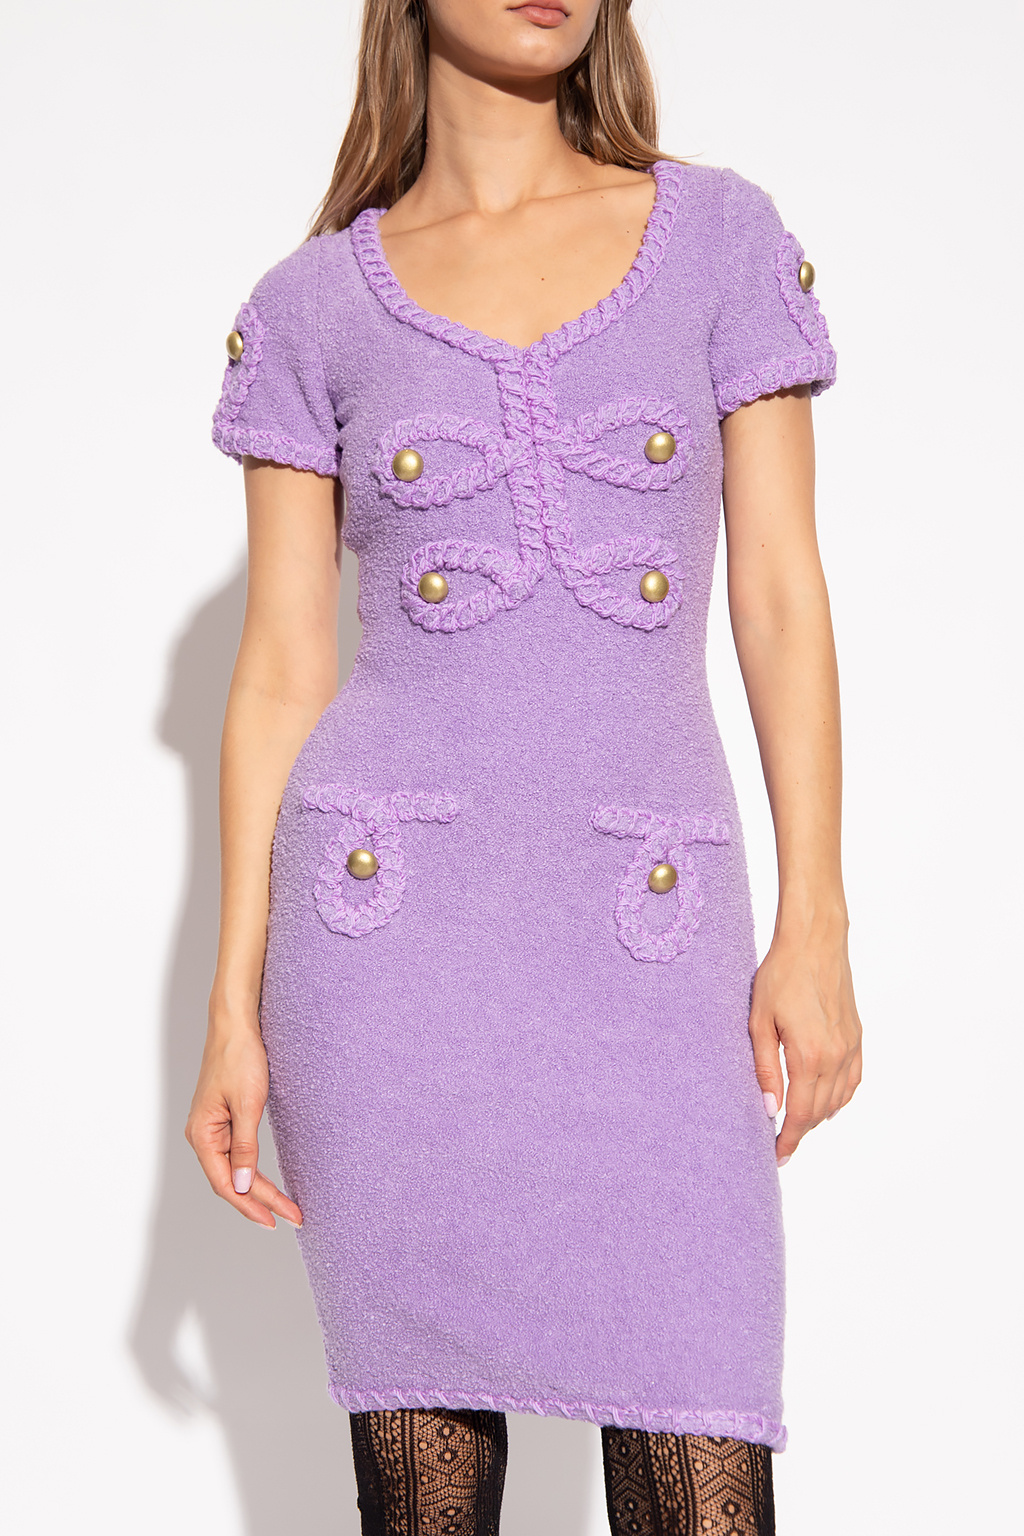 Moschino ruched-detail fitted dress